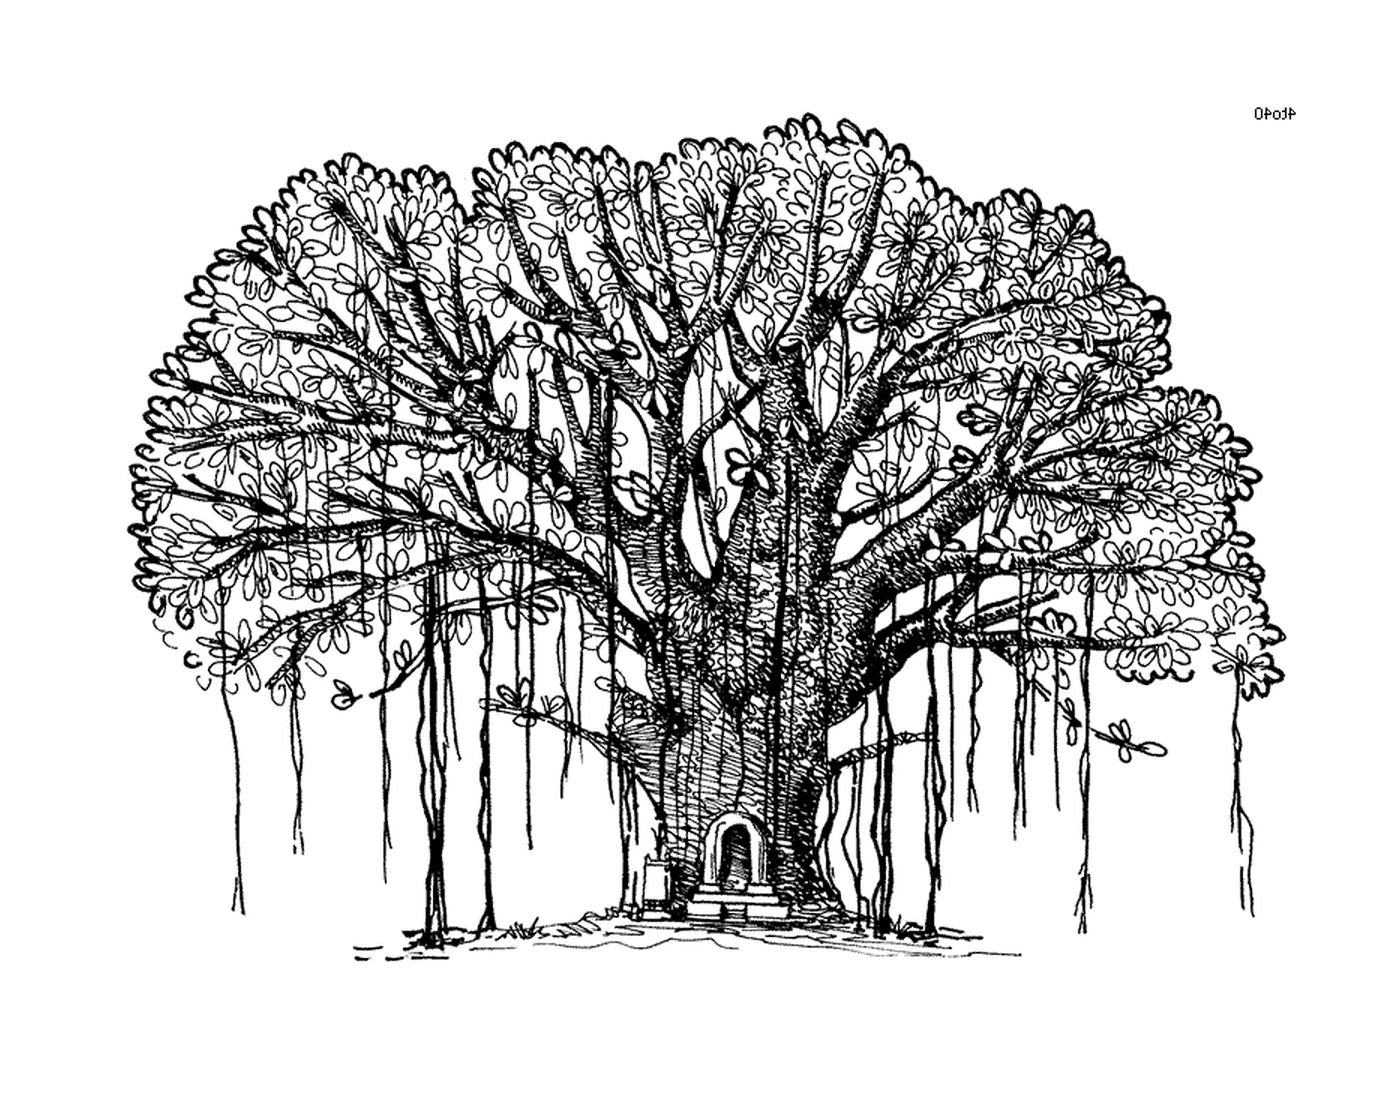  An ink, a big tree with a bench in the middle 